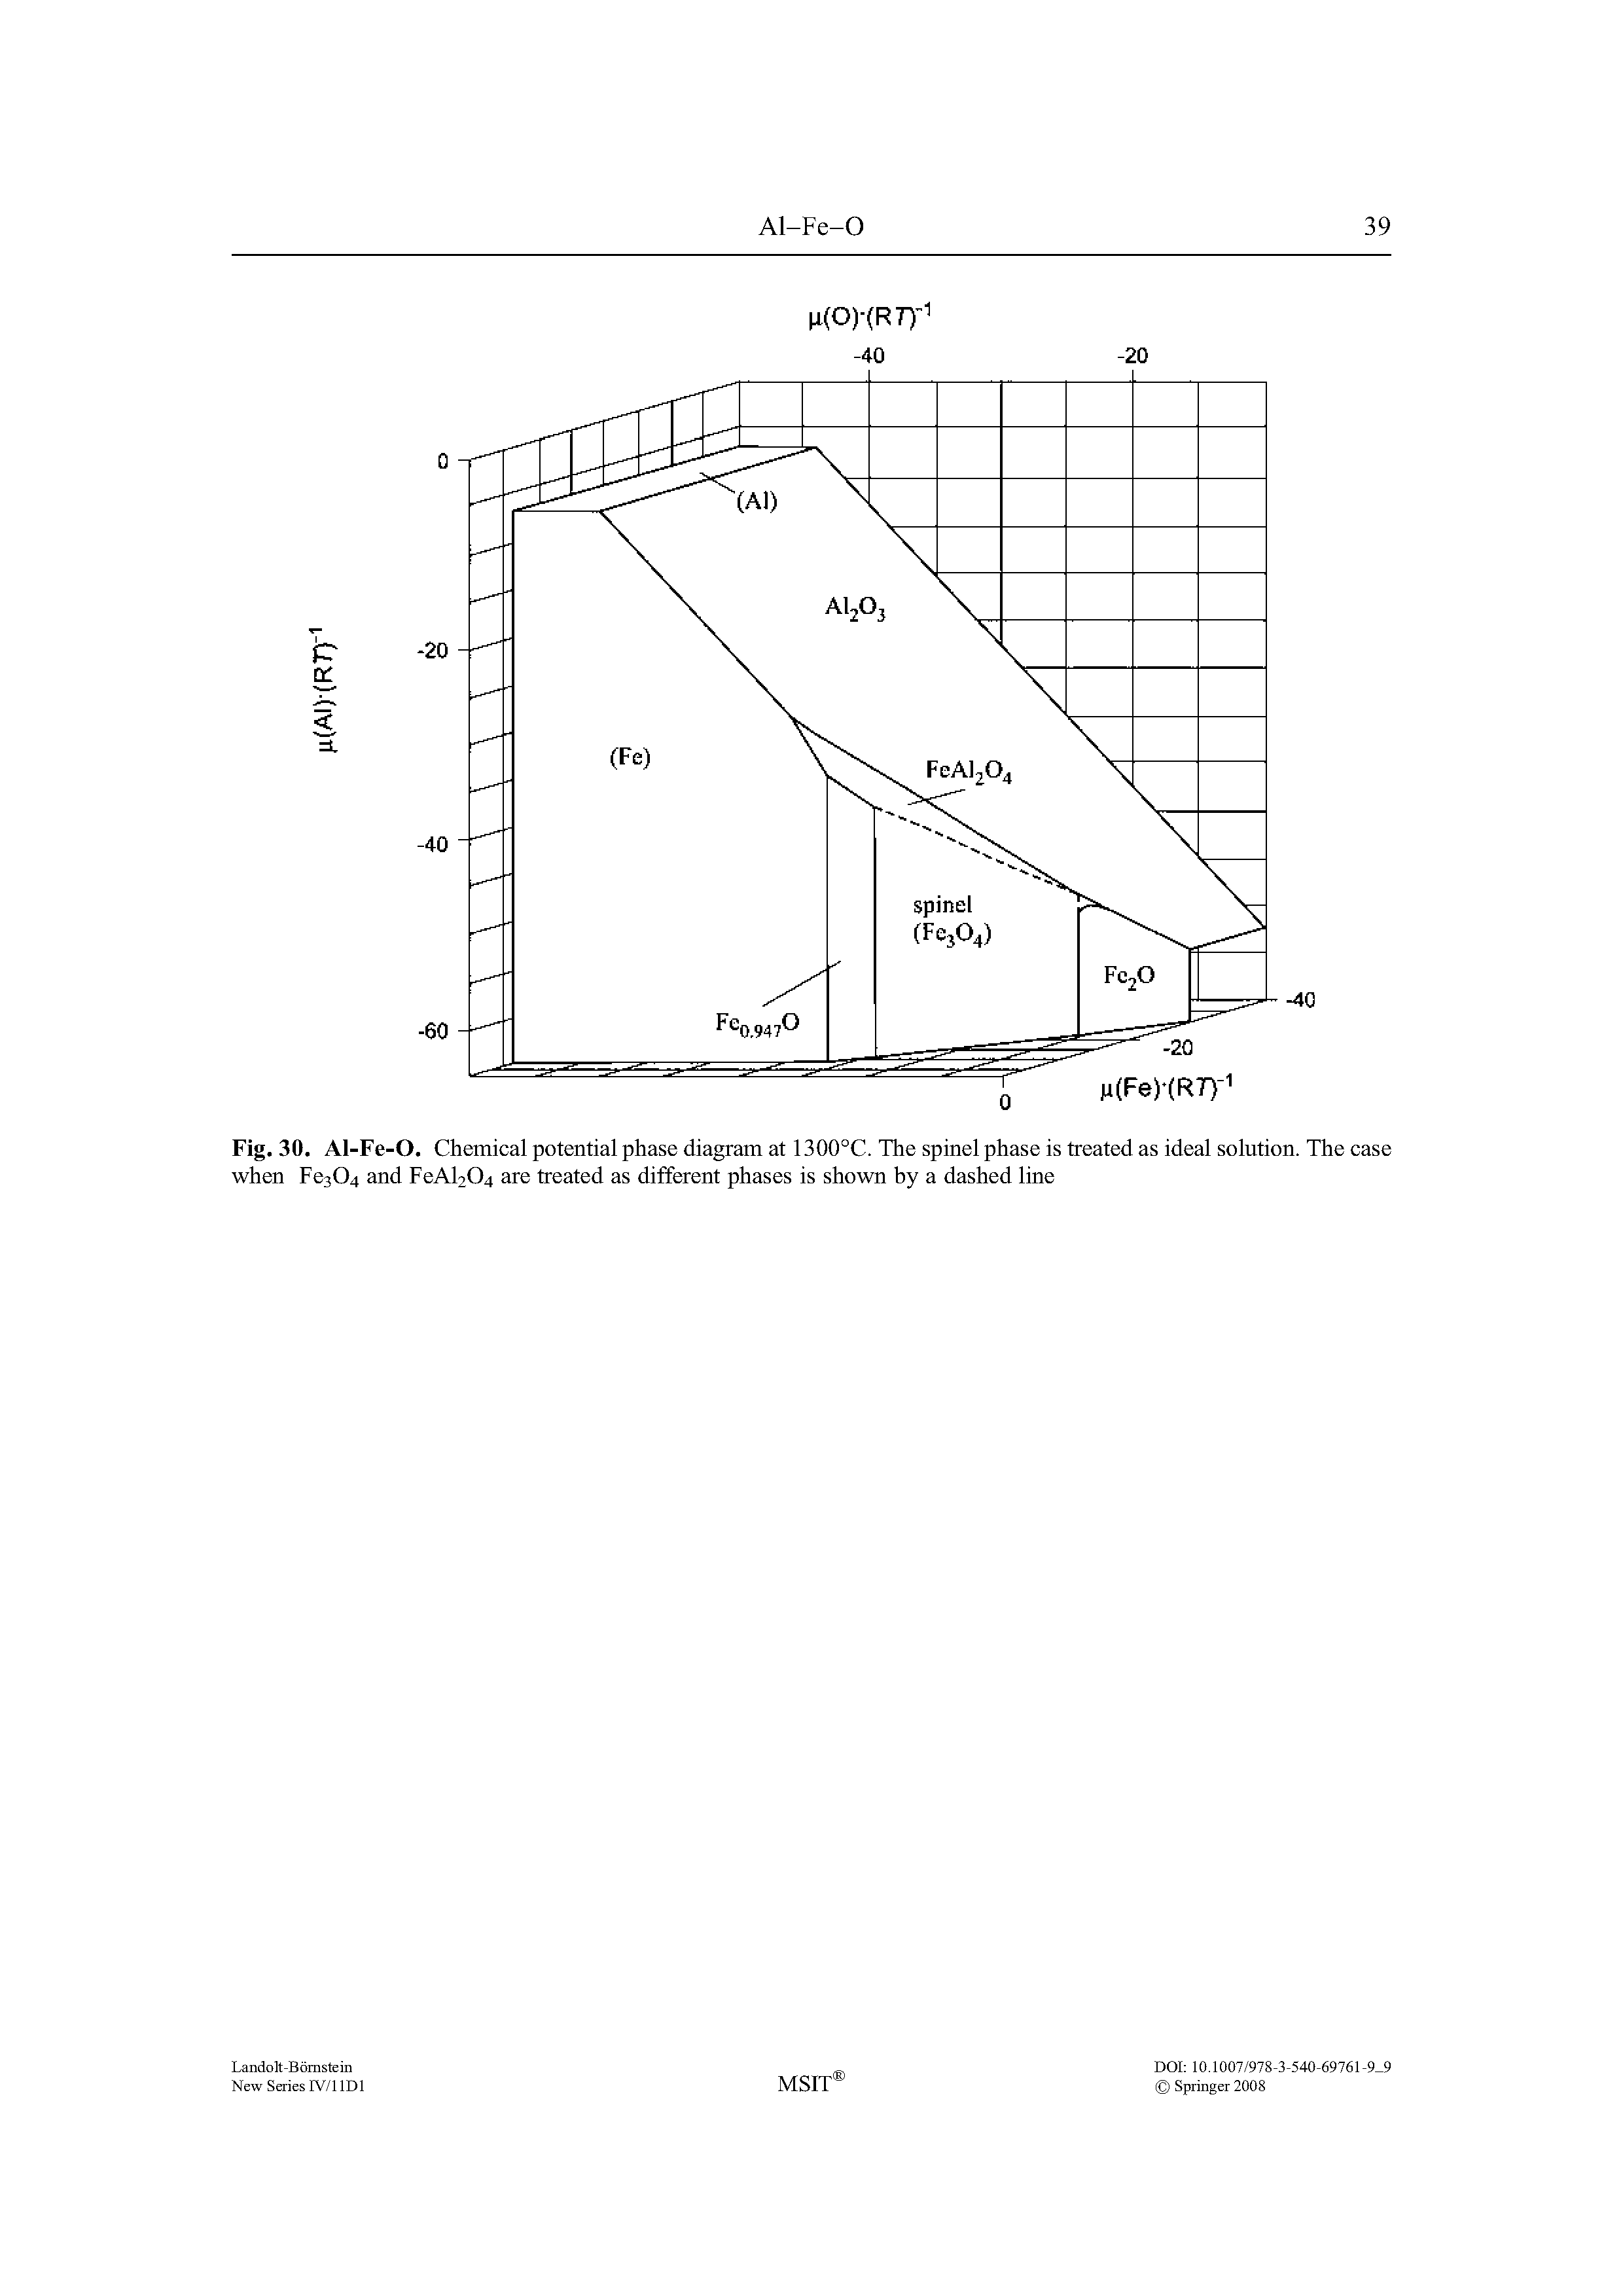 Fig. 30. Al-Fe-O. Chemical potential phase diagram at 1300°C. The spinel phase is treated as ideal solution. The case when Fc304 and FeAl204 are treated as different phases is shown by a dashed line...